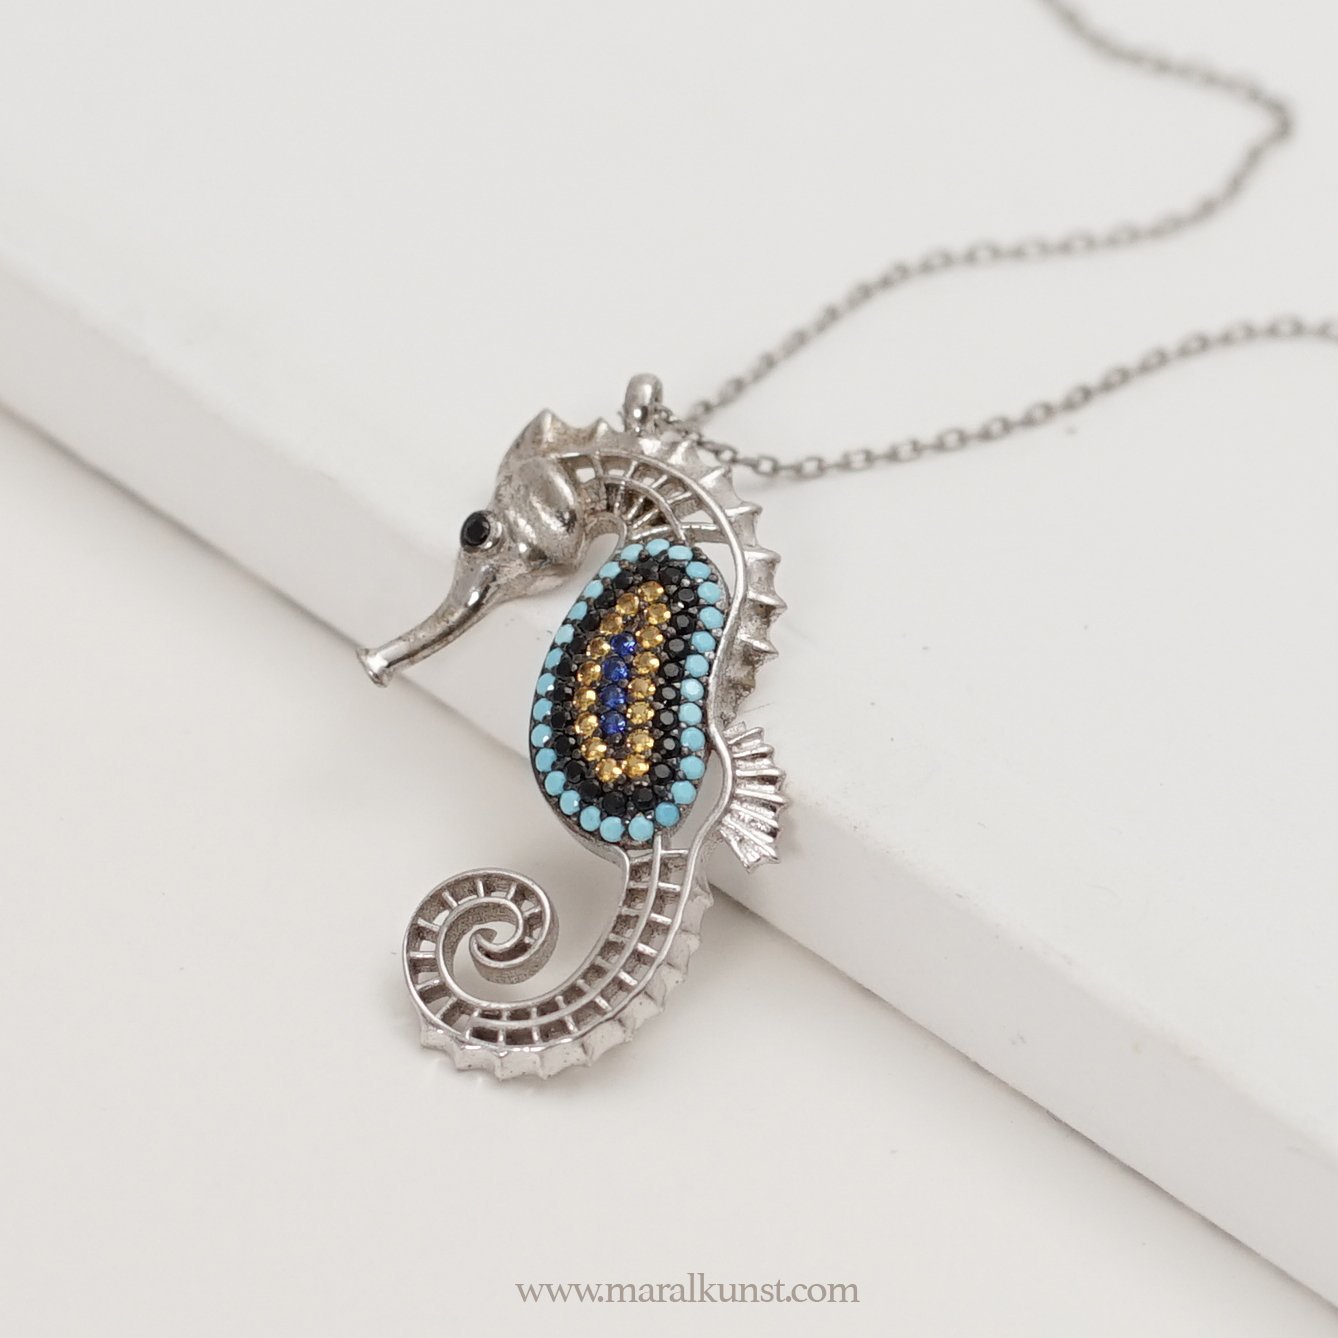 Colorful Seahorse Silver Necklace - Maral Kunst Jewelry